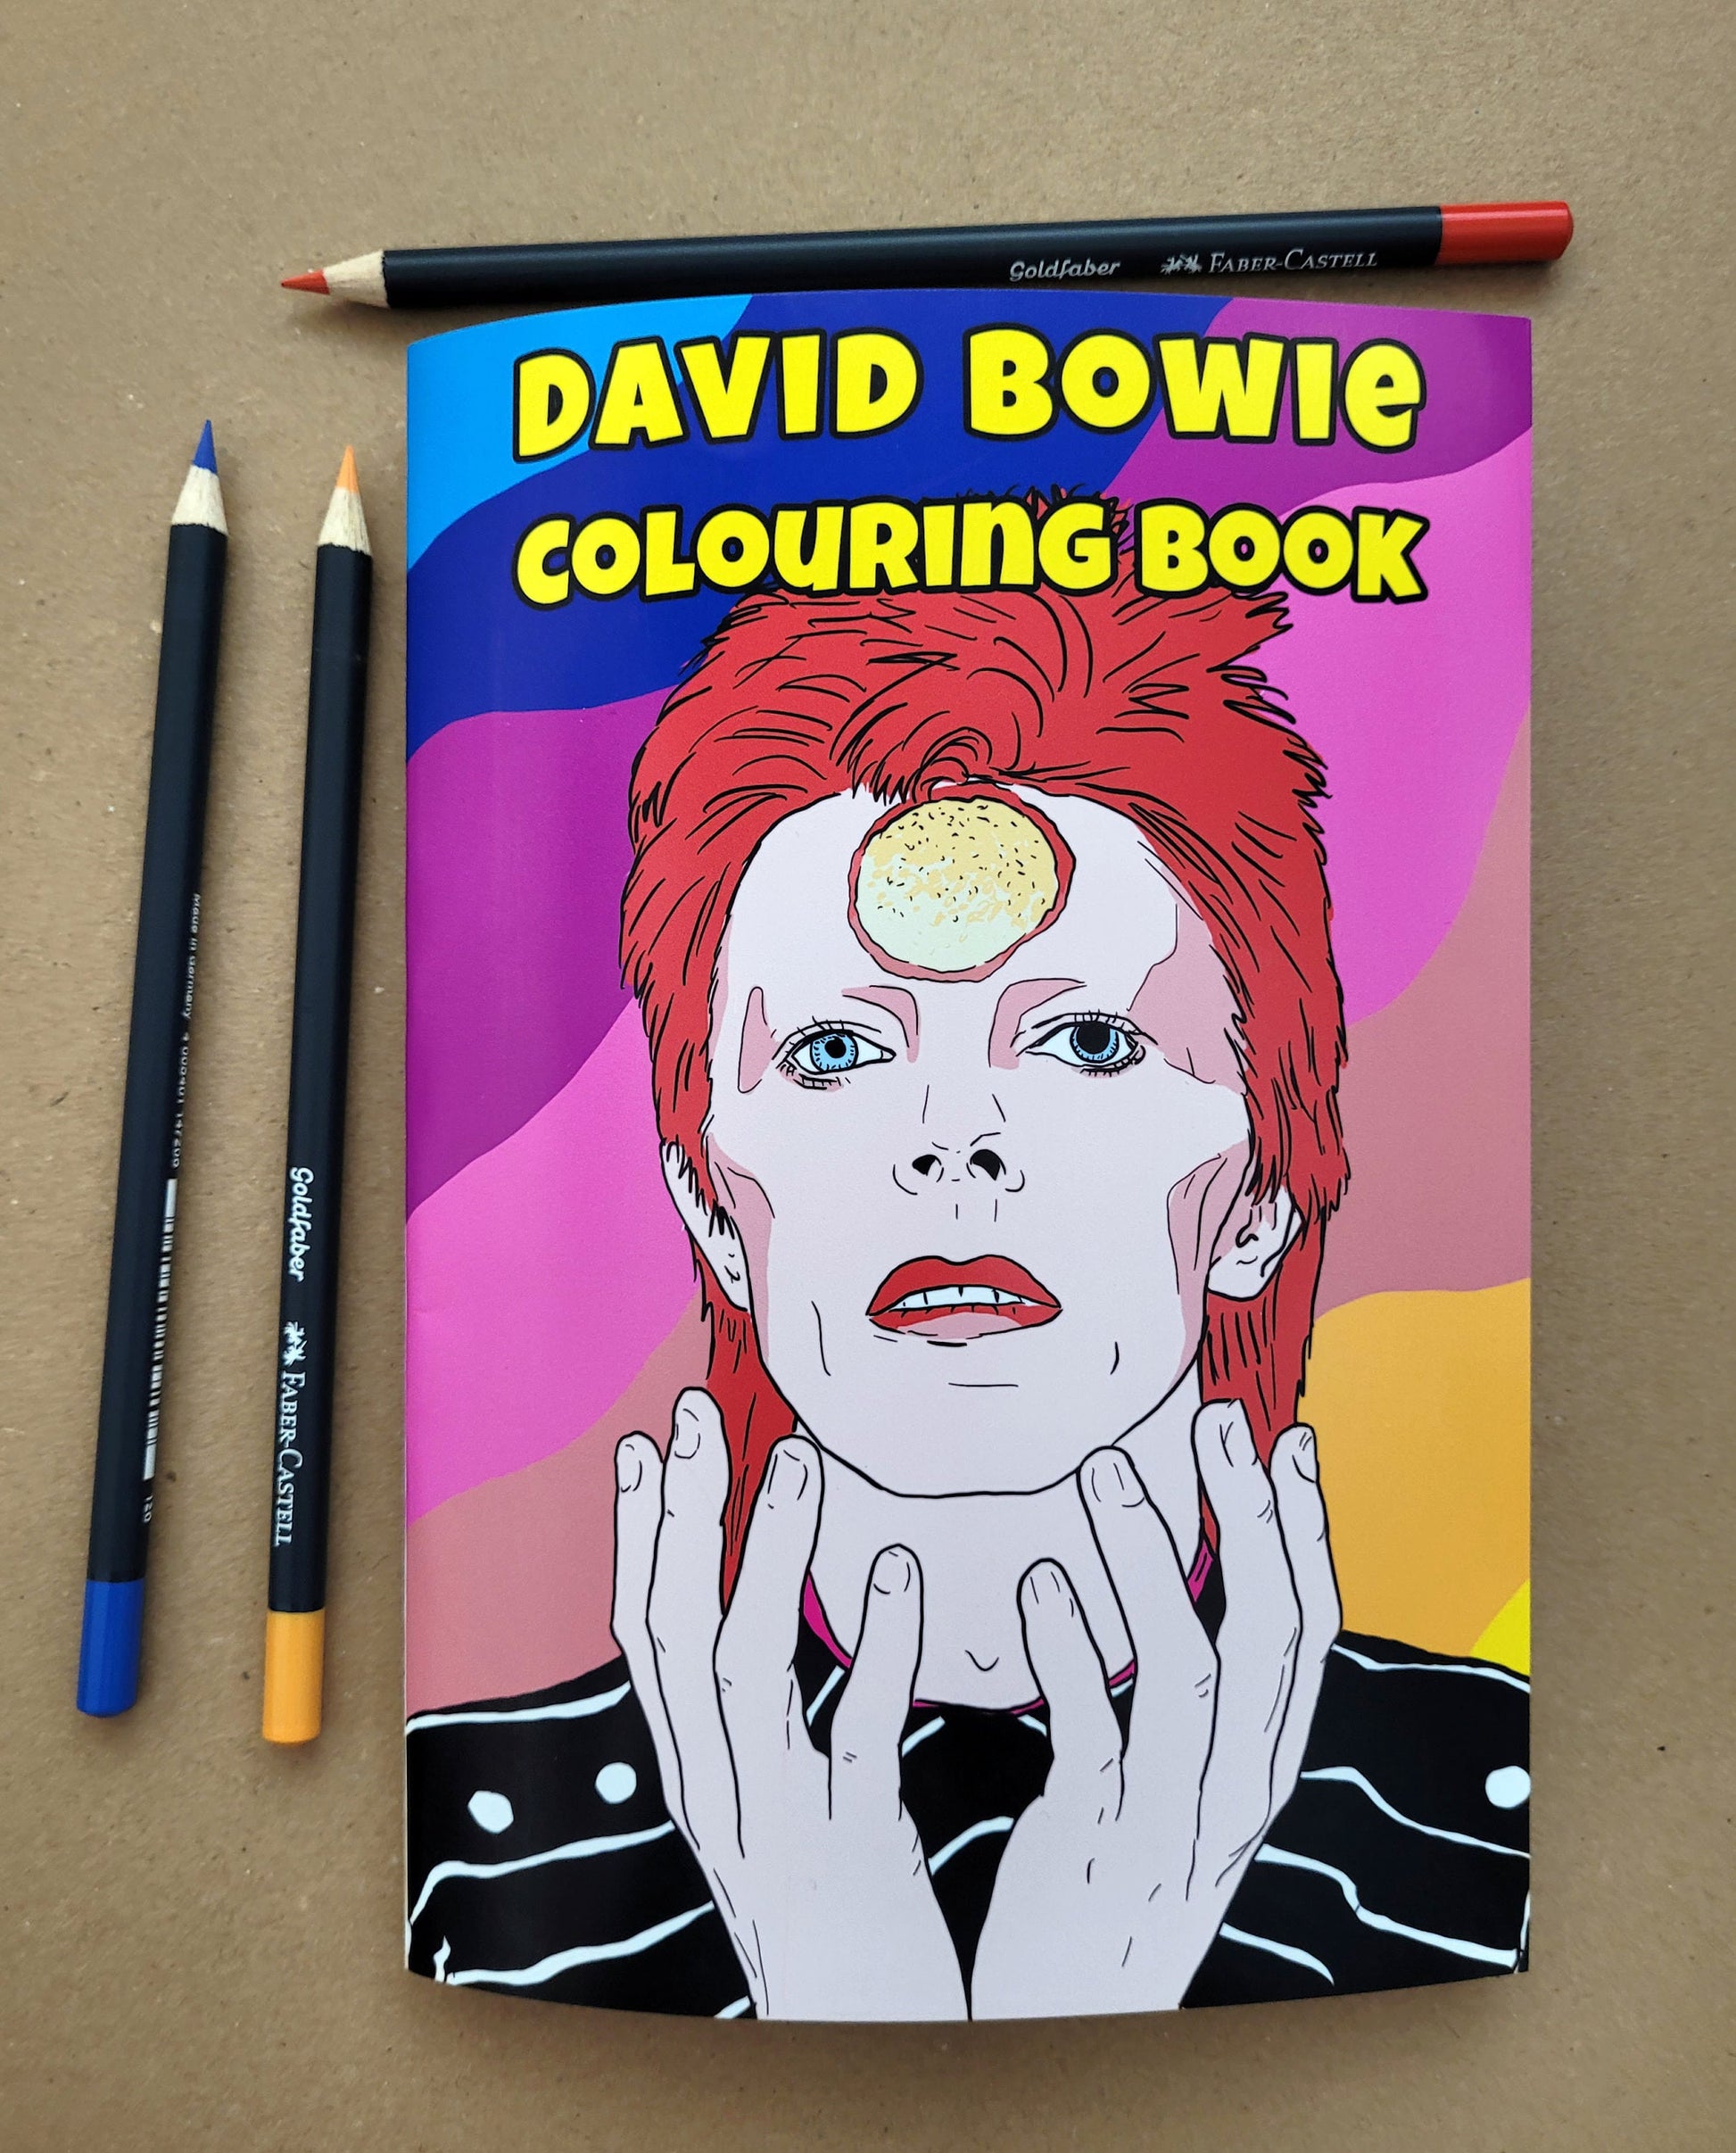 David Bowie Colouring Book, adult colouring book, gift for David Bowie fan, activity book, birthday gift, david bowie artwork